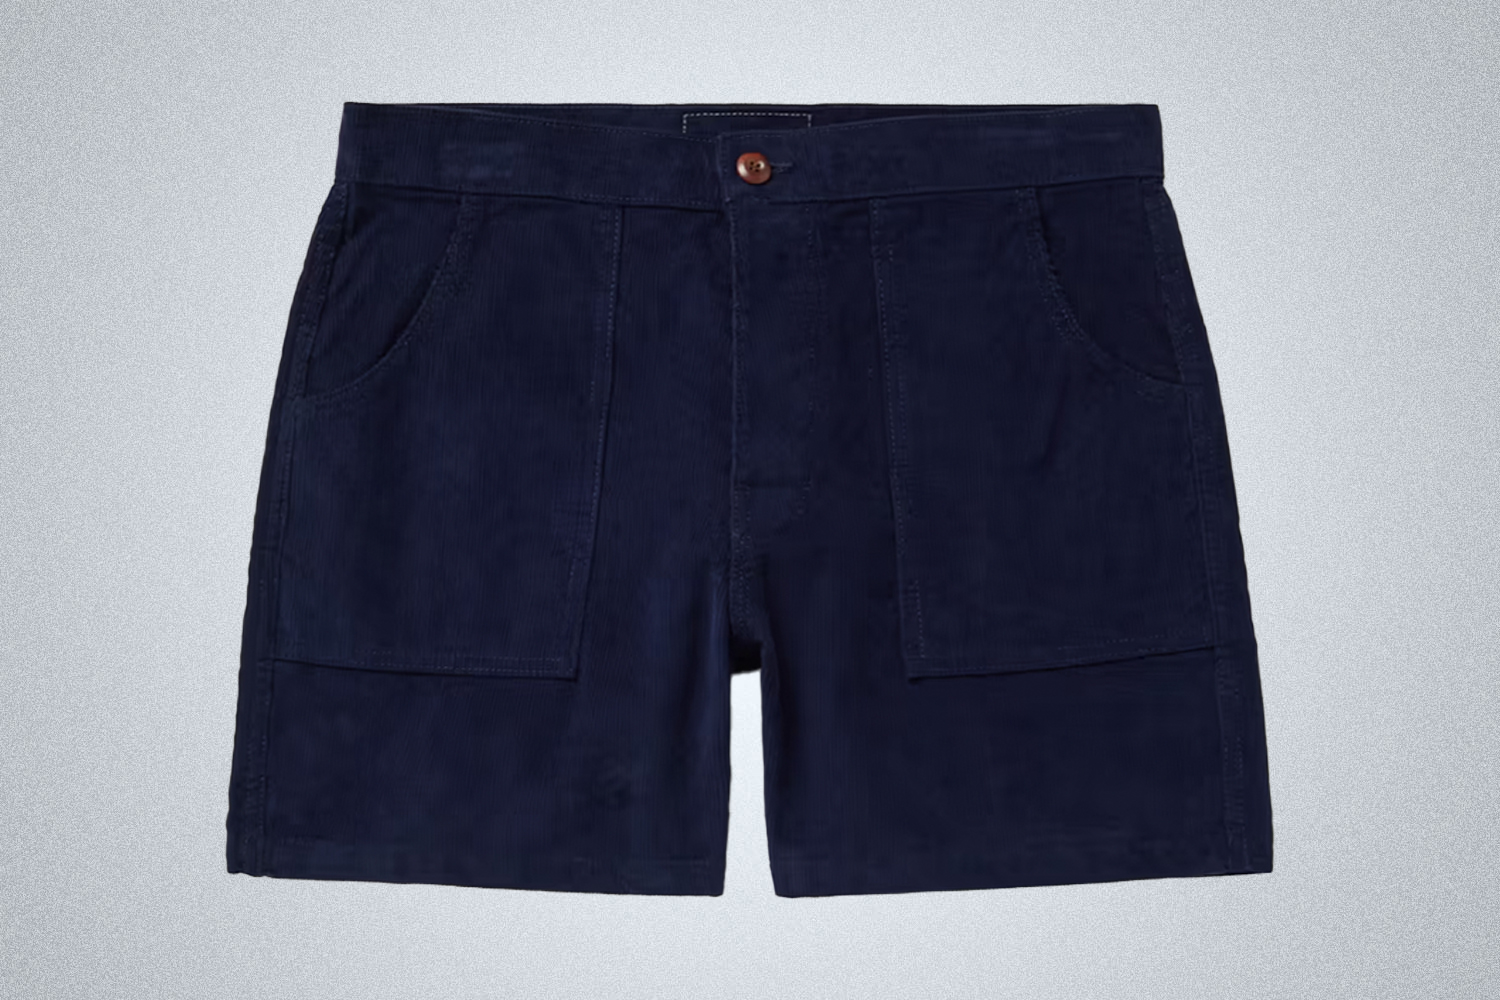 a pair of navy Birdwell Britches corduroy shorts on a grey background